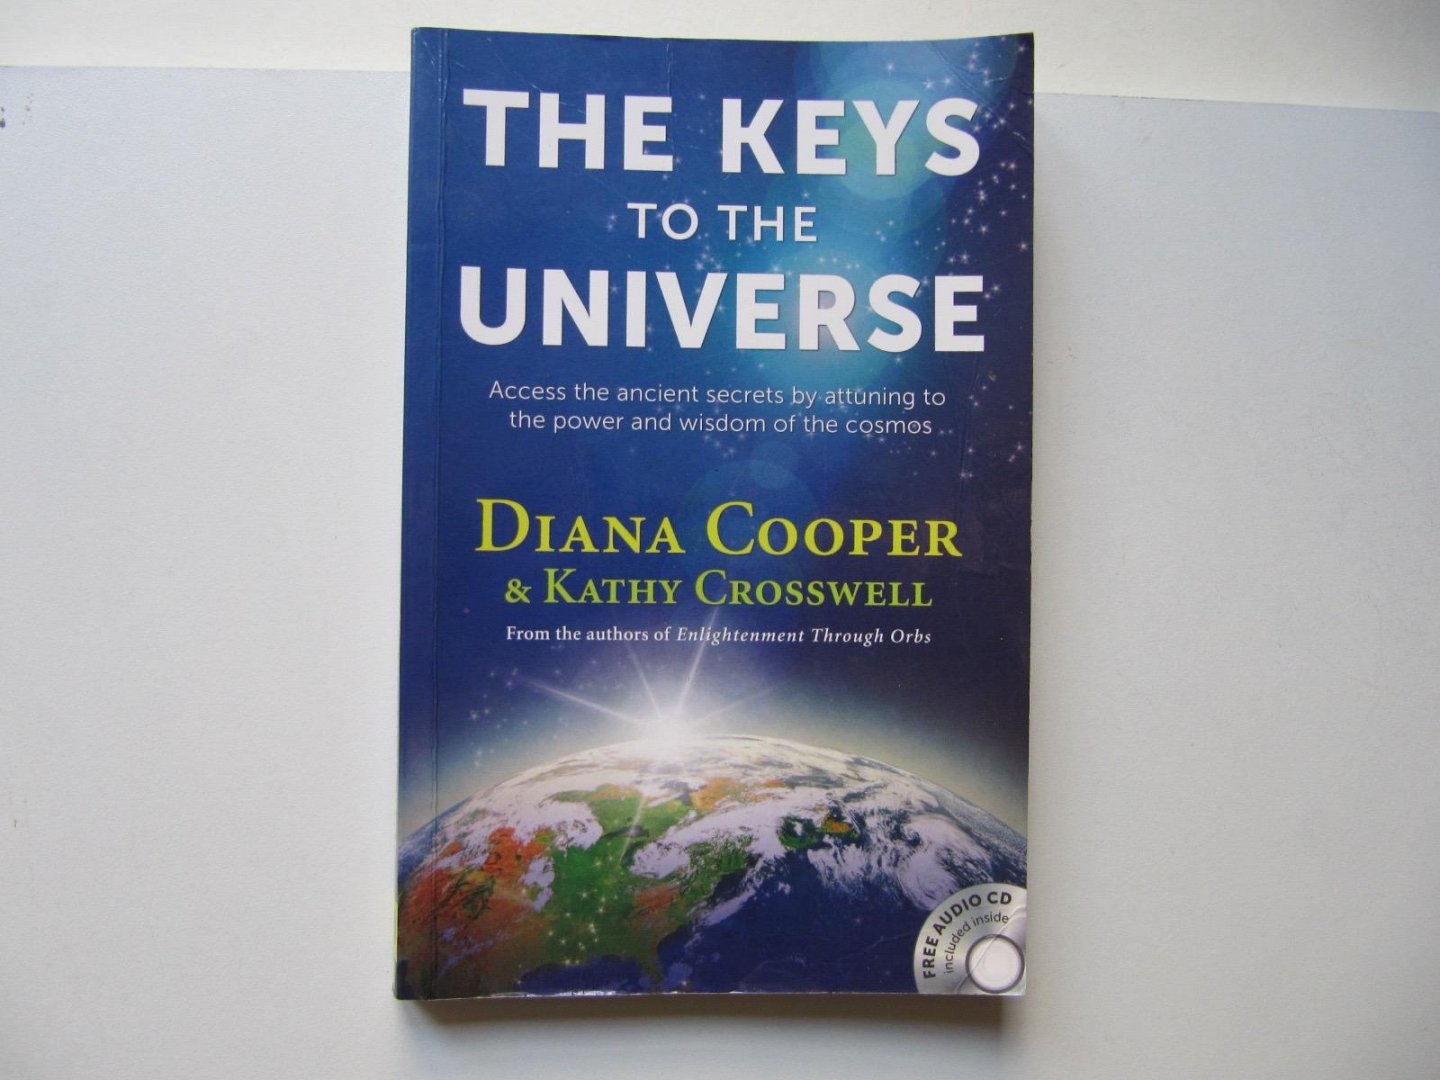 Diana Cooper & Kathy Crosswell - The Keys to the Universe